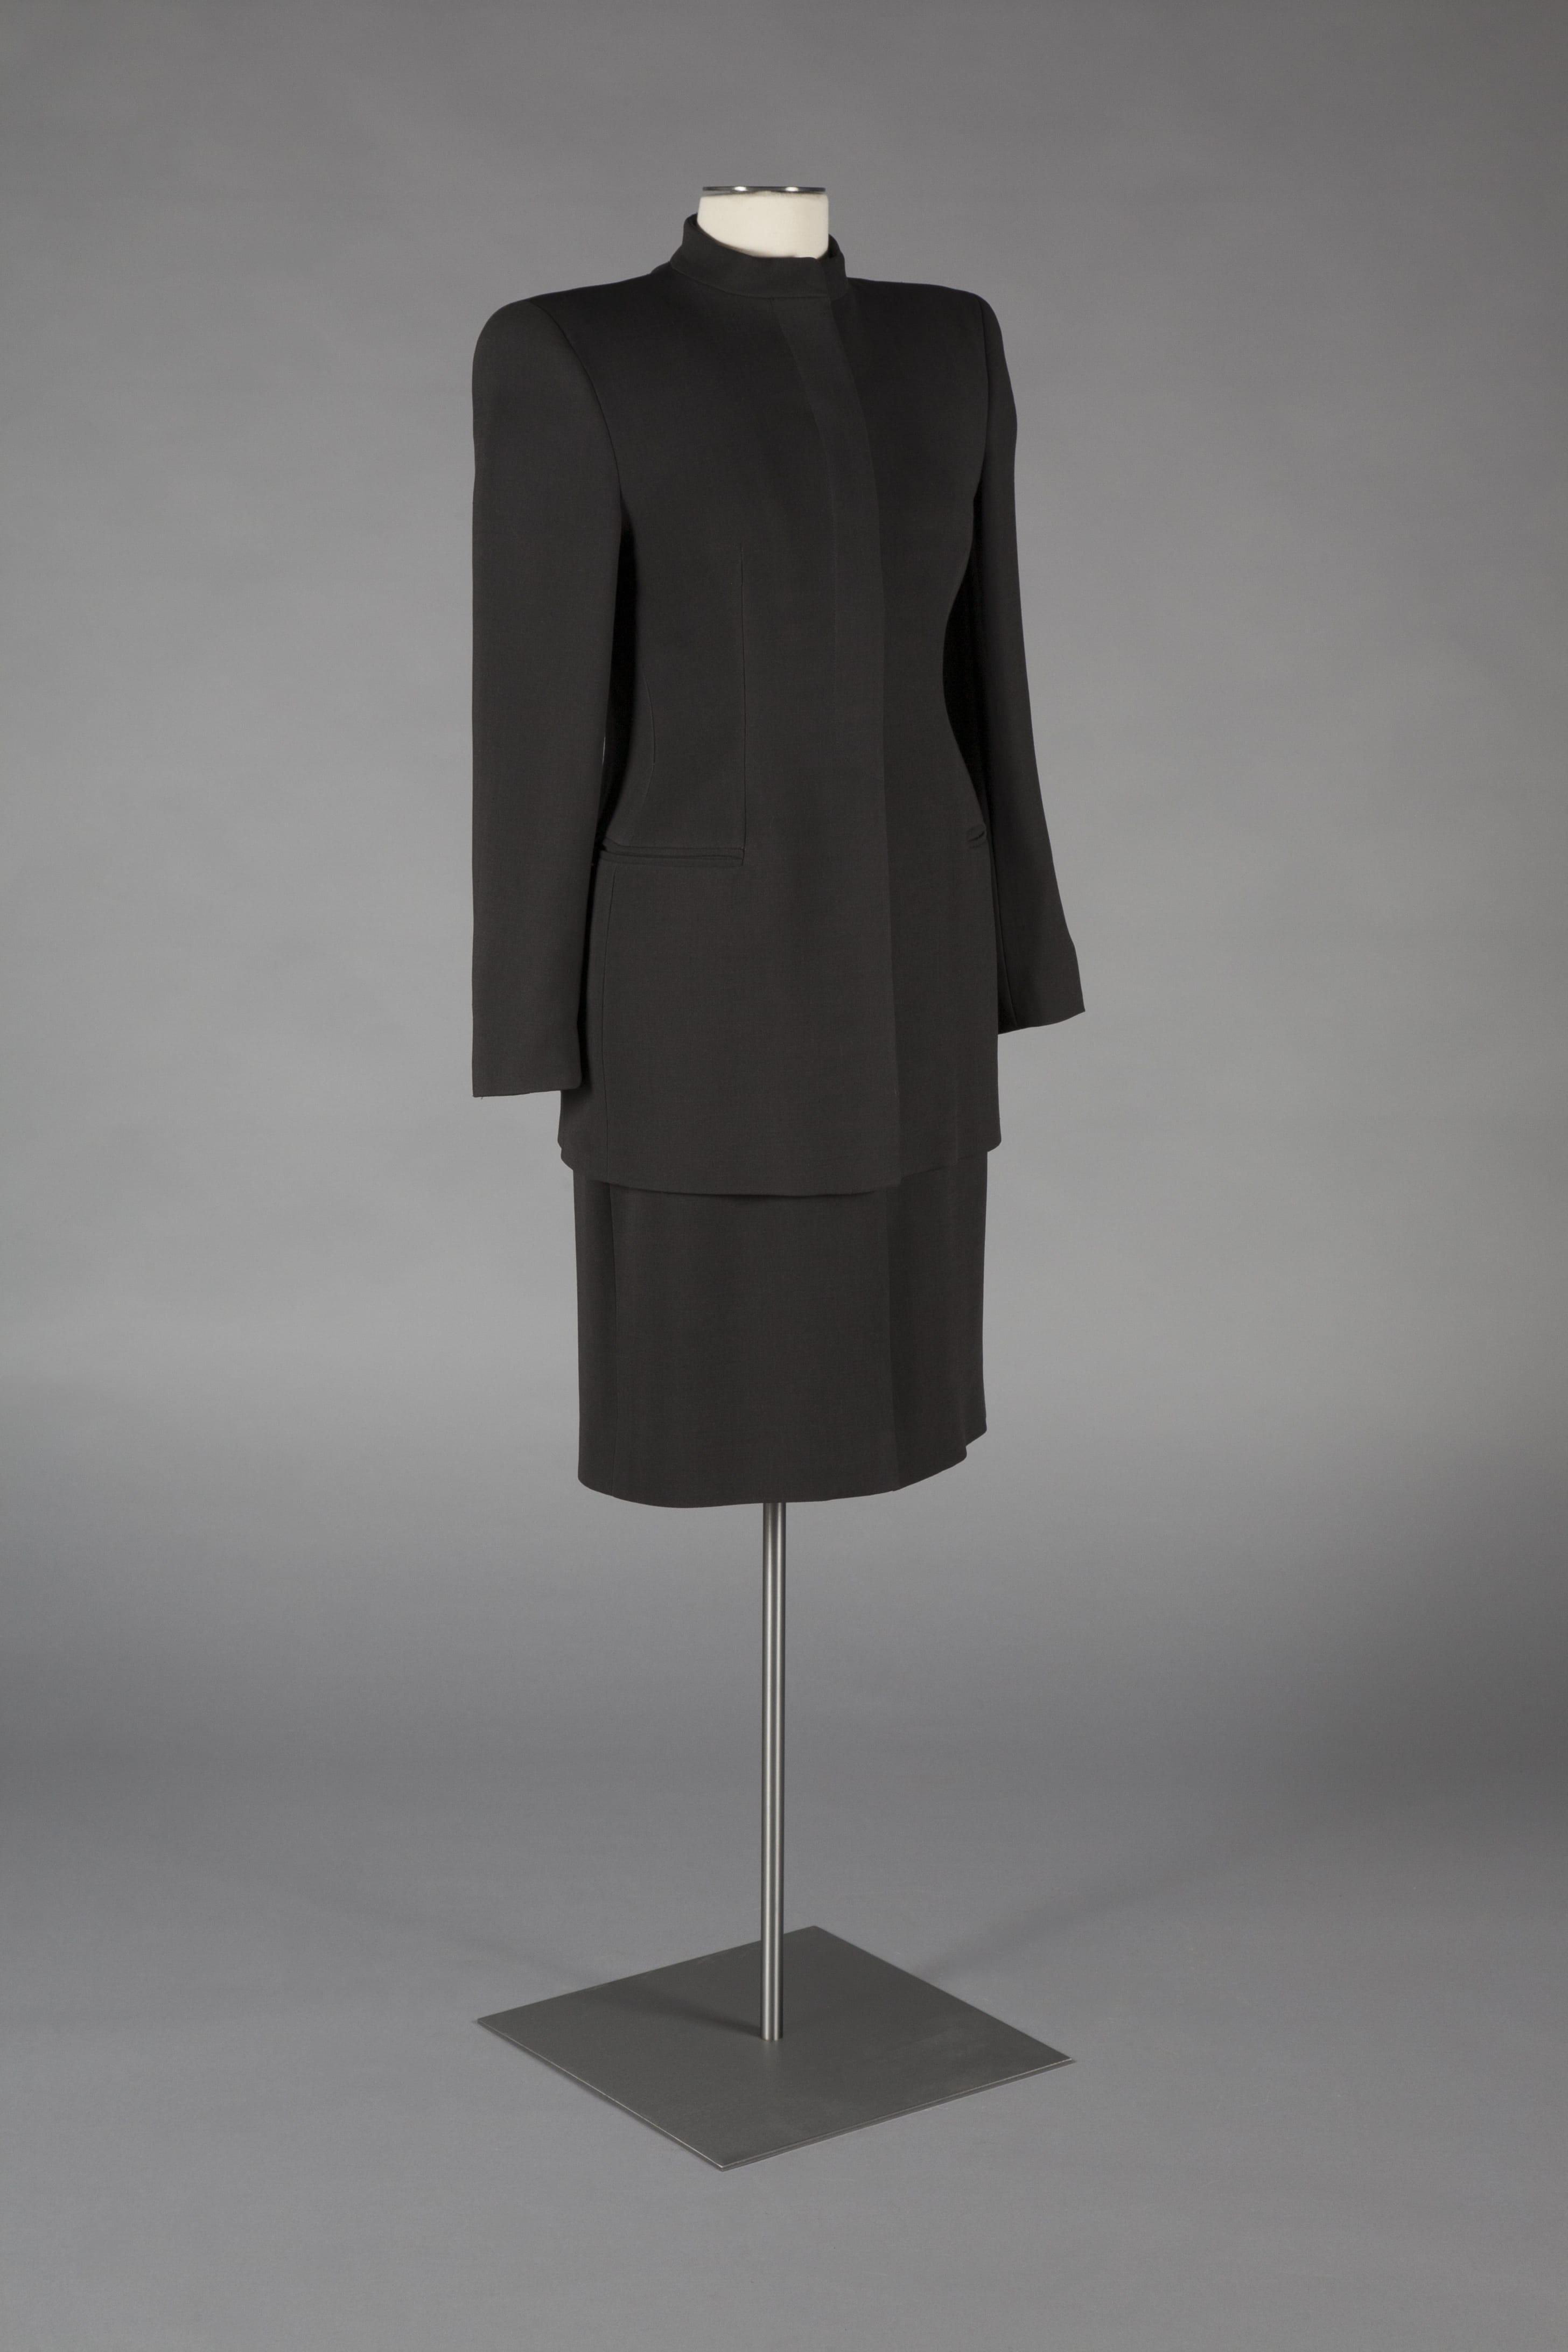 Day Suit, Armani, Italy, 1987, gift of Sally C. Bleznak.